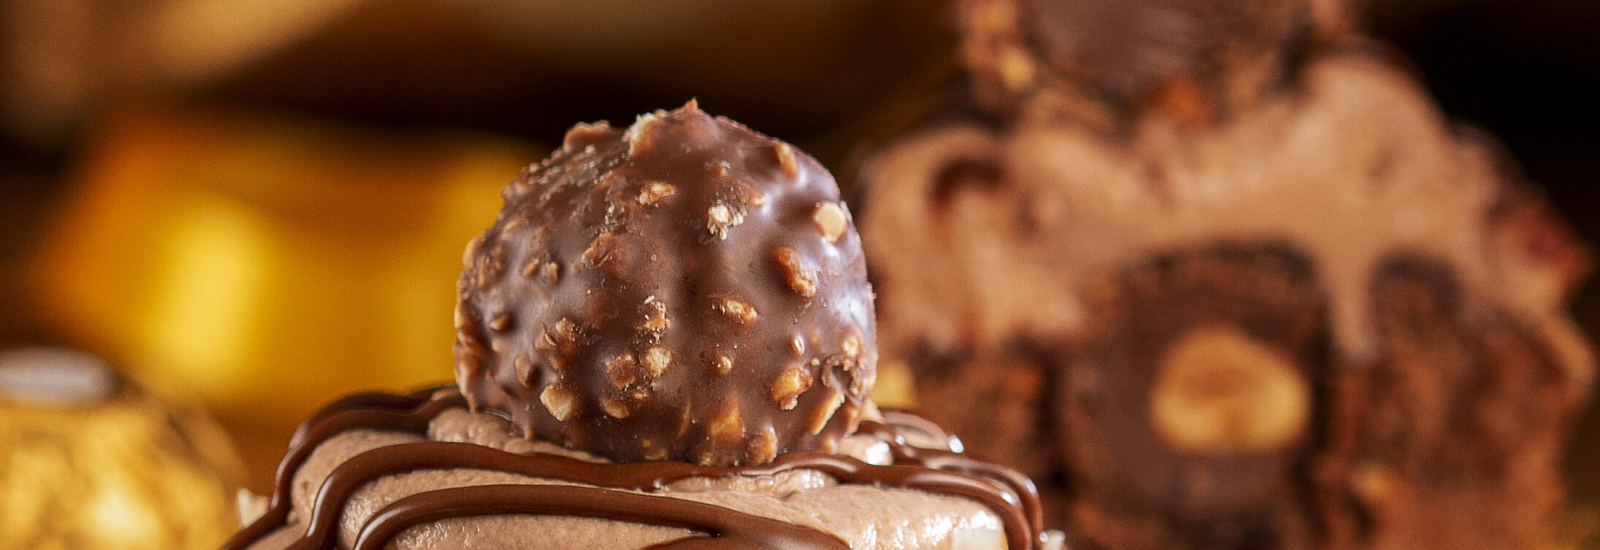 The most famous Italian Candy: how is a Ferrero Rocher made